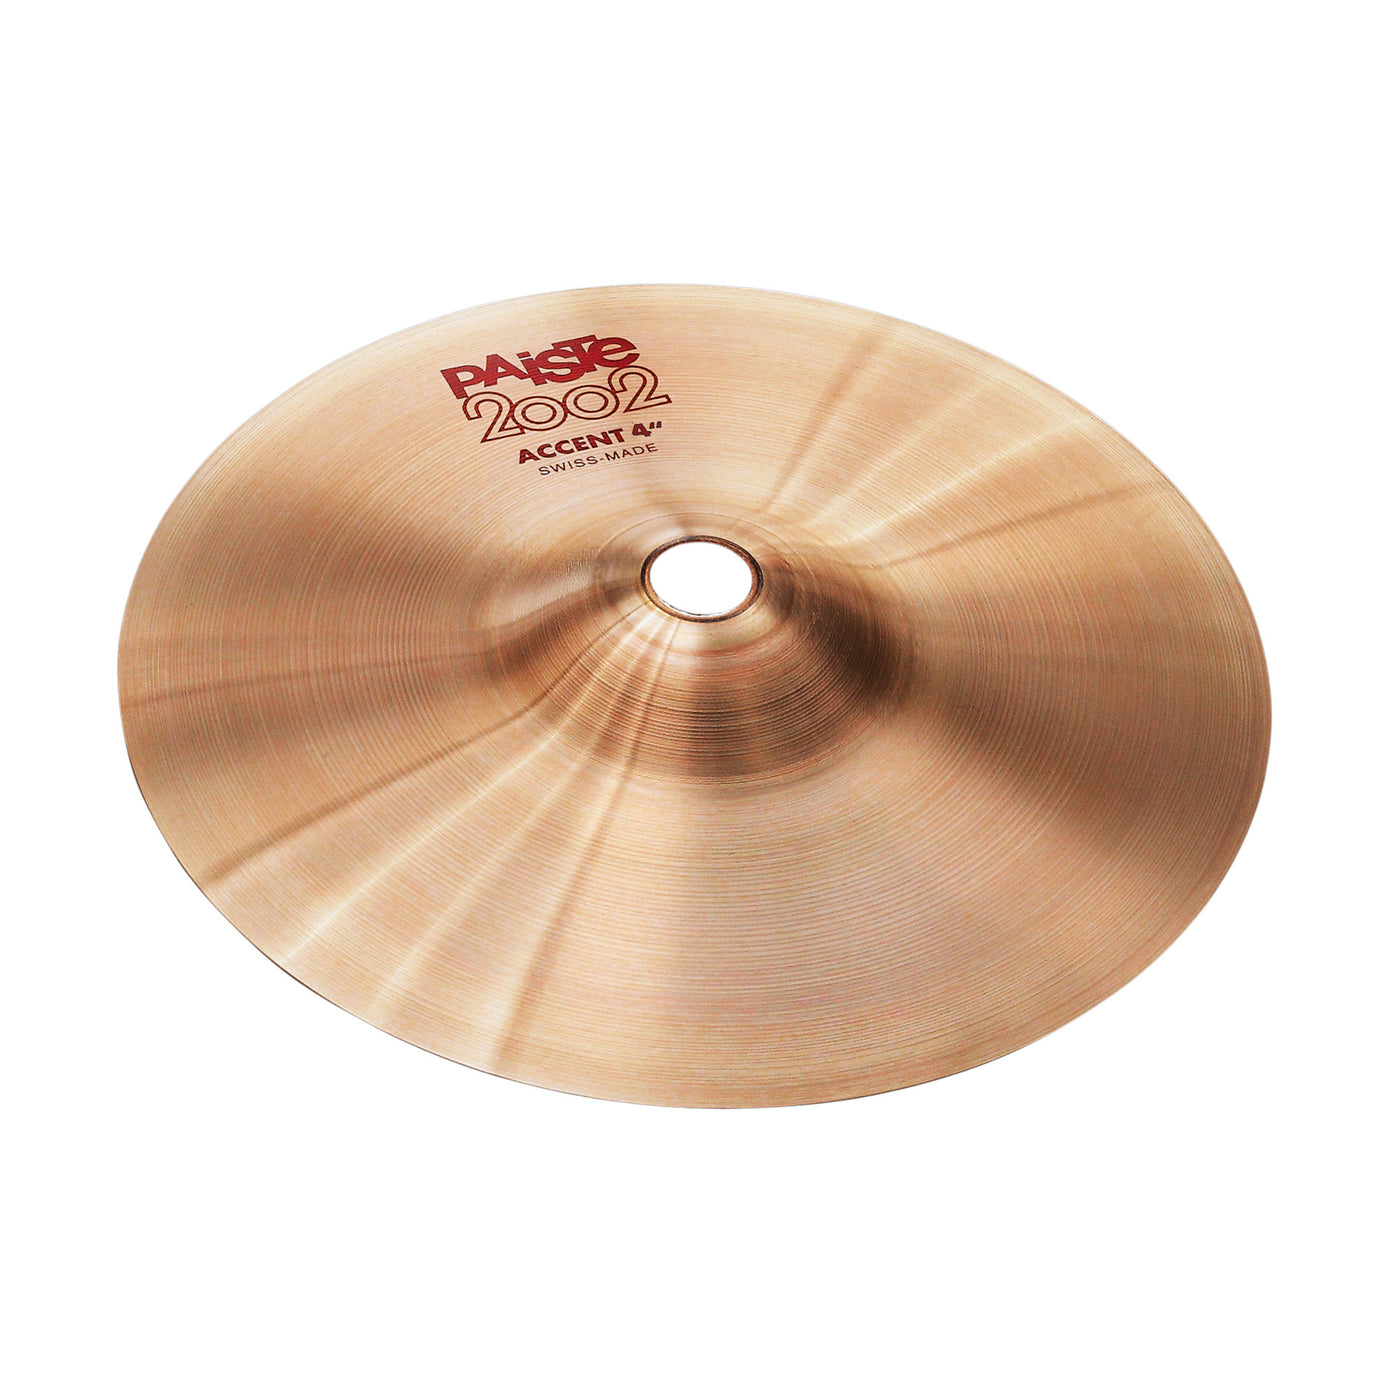 Paiste Accent Cymbal, 2002 Series, Percussion Instrument for Drums, 4"